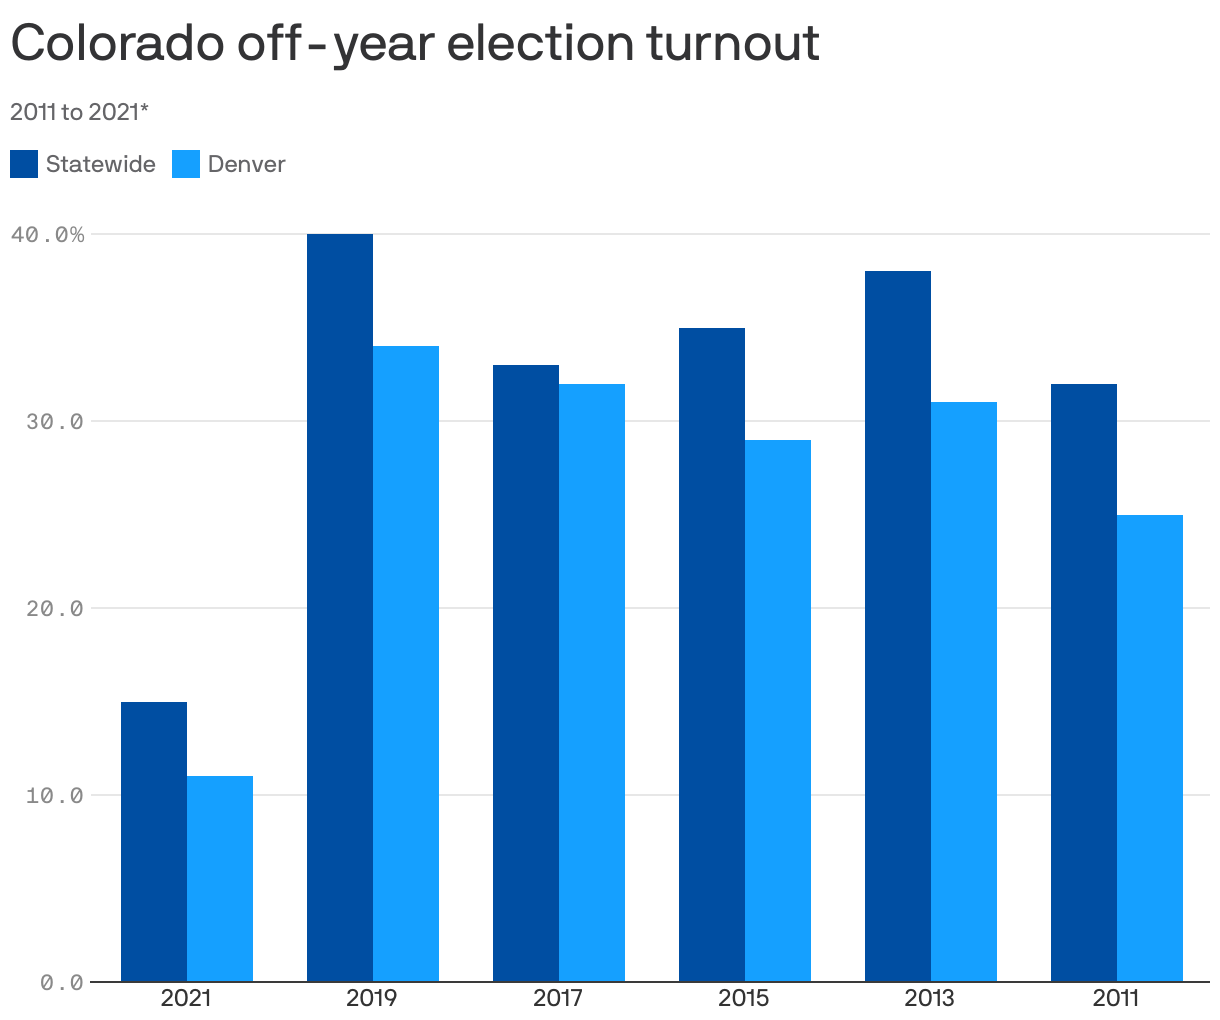 Colorado off-year election turnout